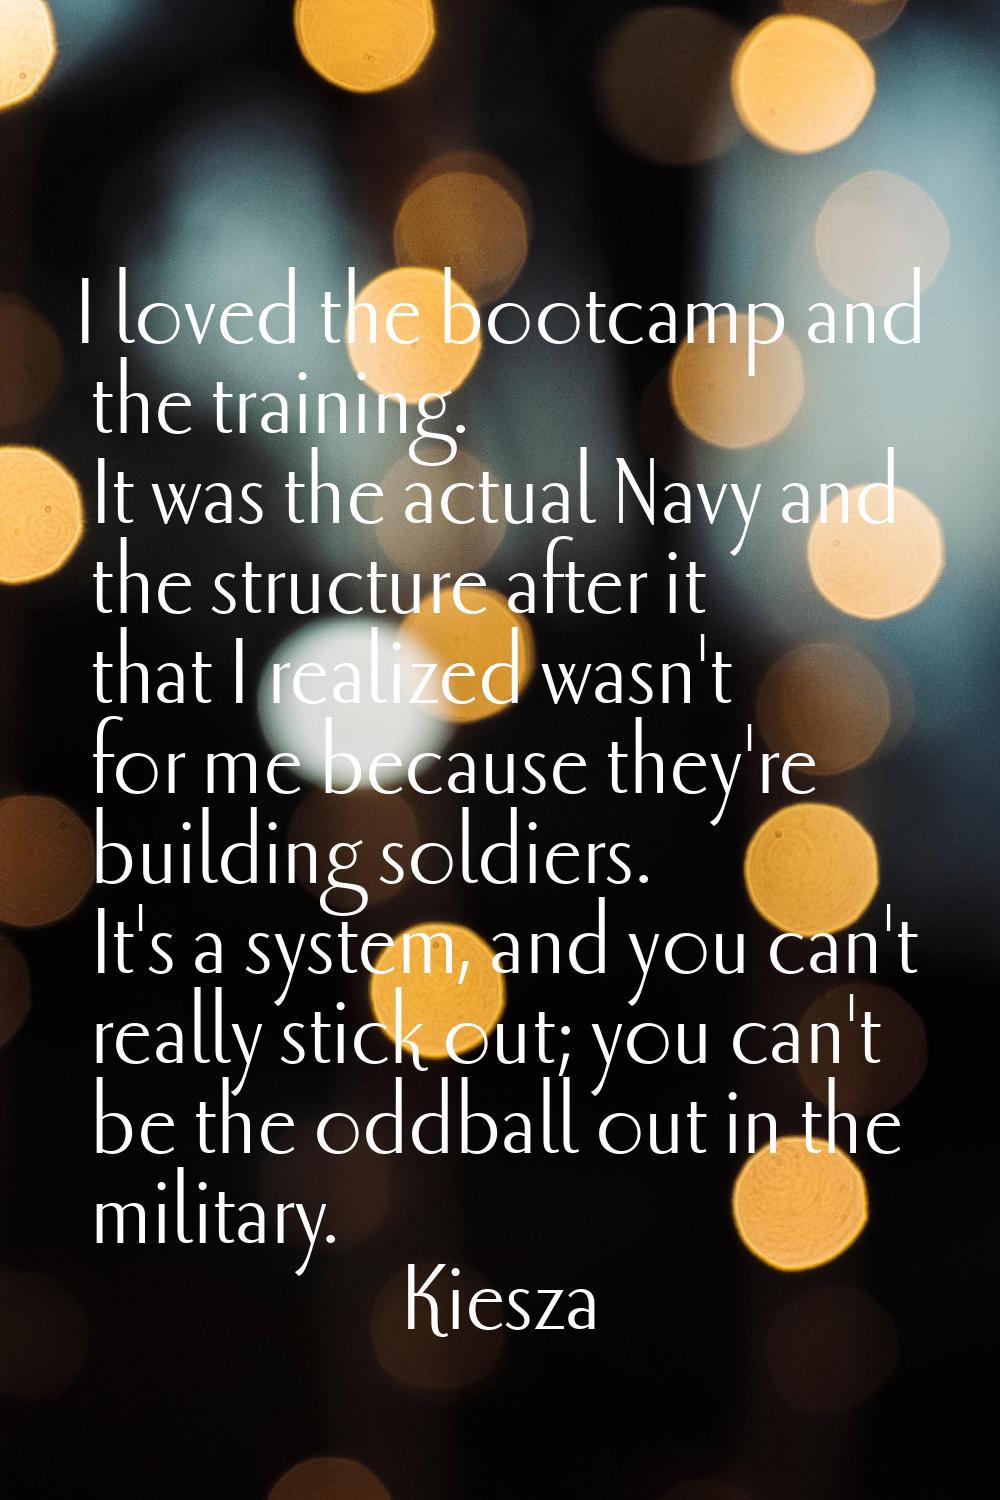 I loved the bootcamp and the training. It was the actual Navy and the structure after it that I rea